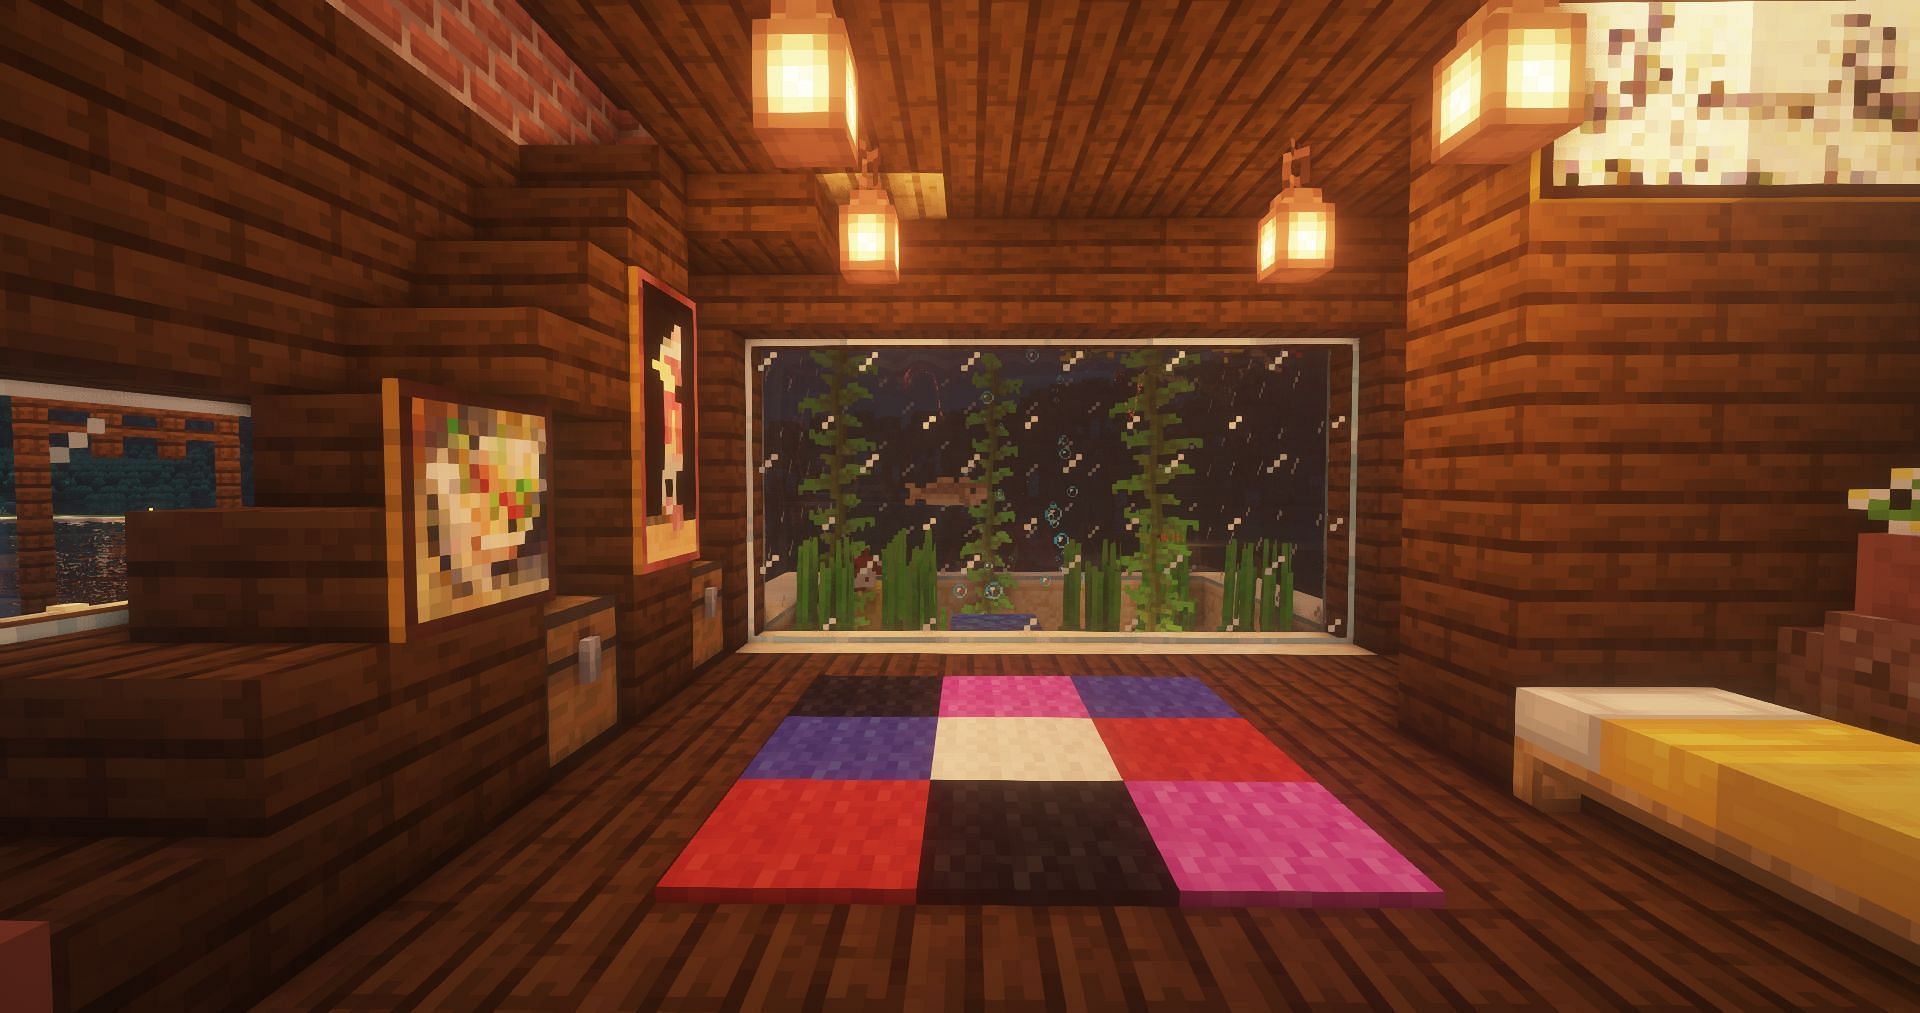 An example of a fish tank built into a wall (Image via r/minecraft)